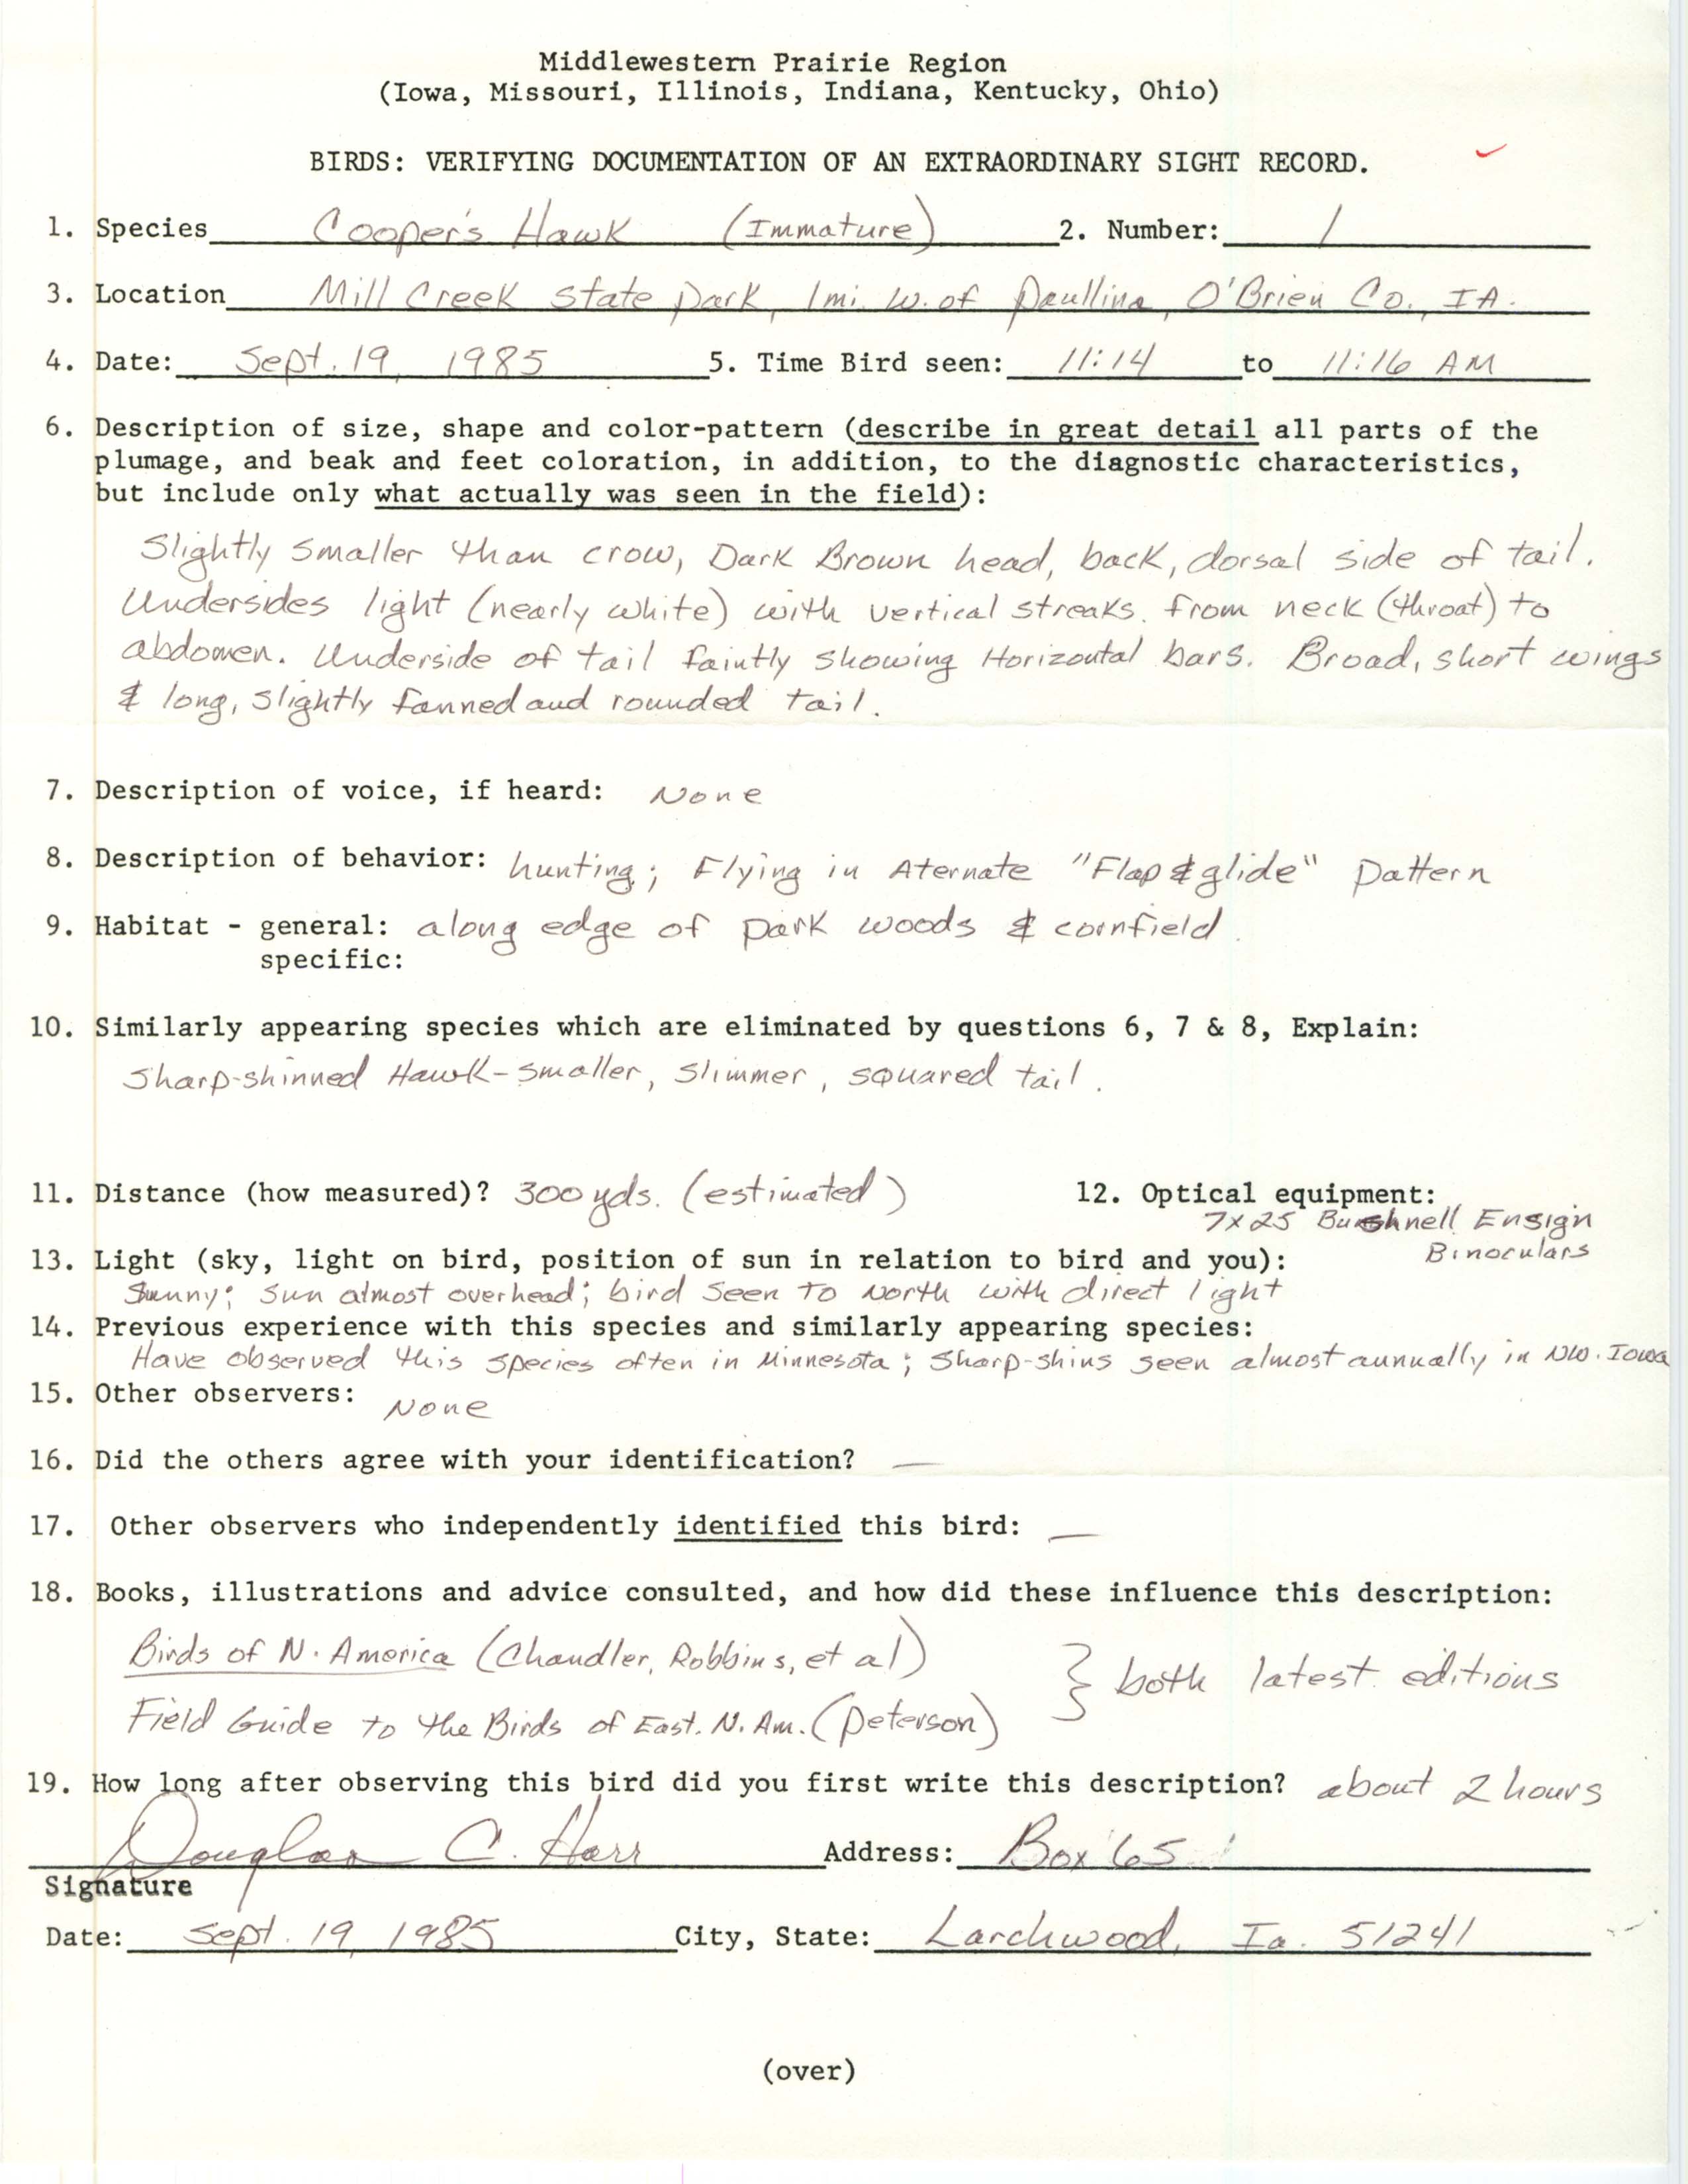 Rare bird documentation form for Cooper's Hawk at Mill Creek State Park, 1985